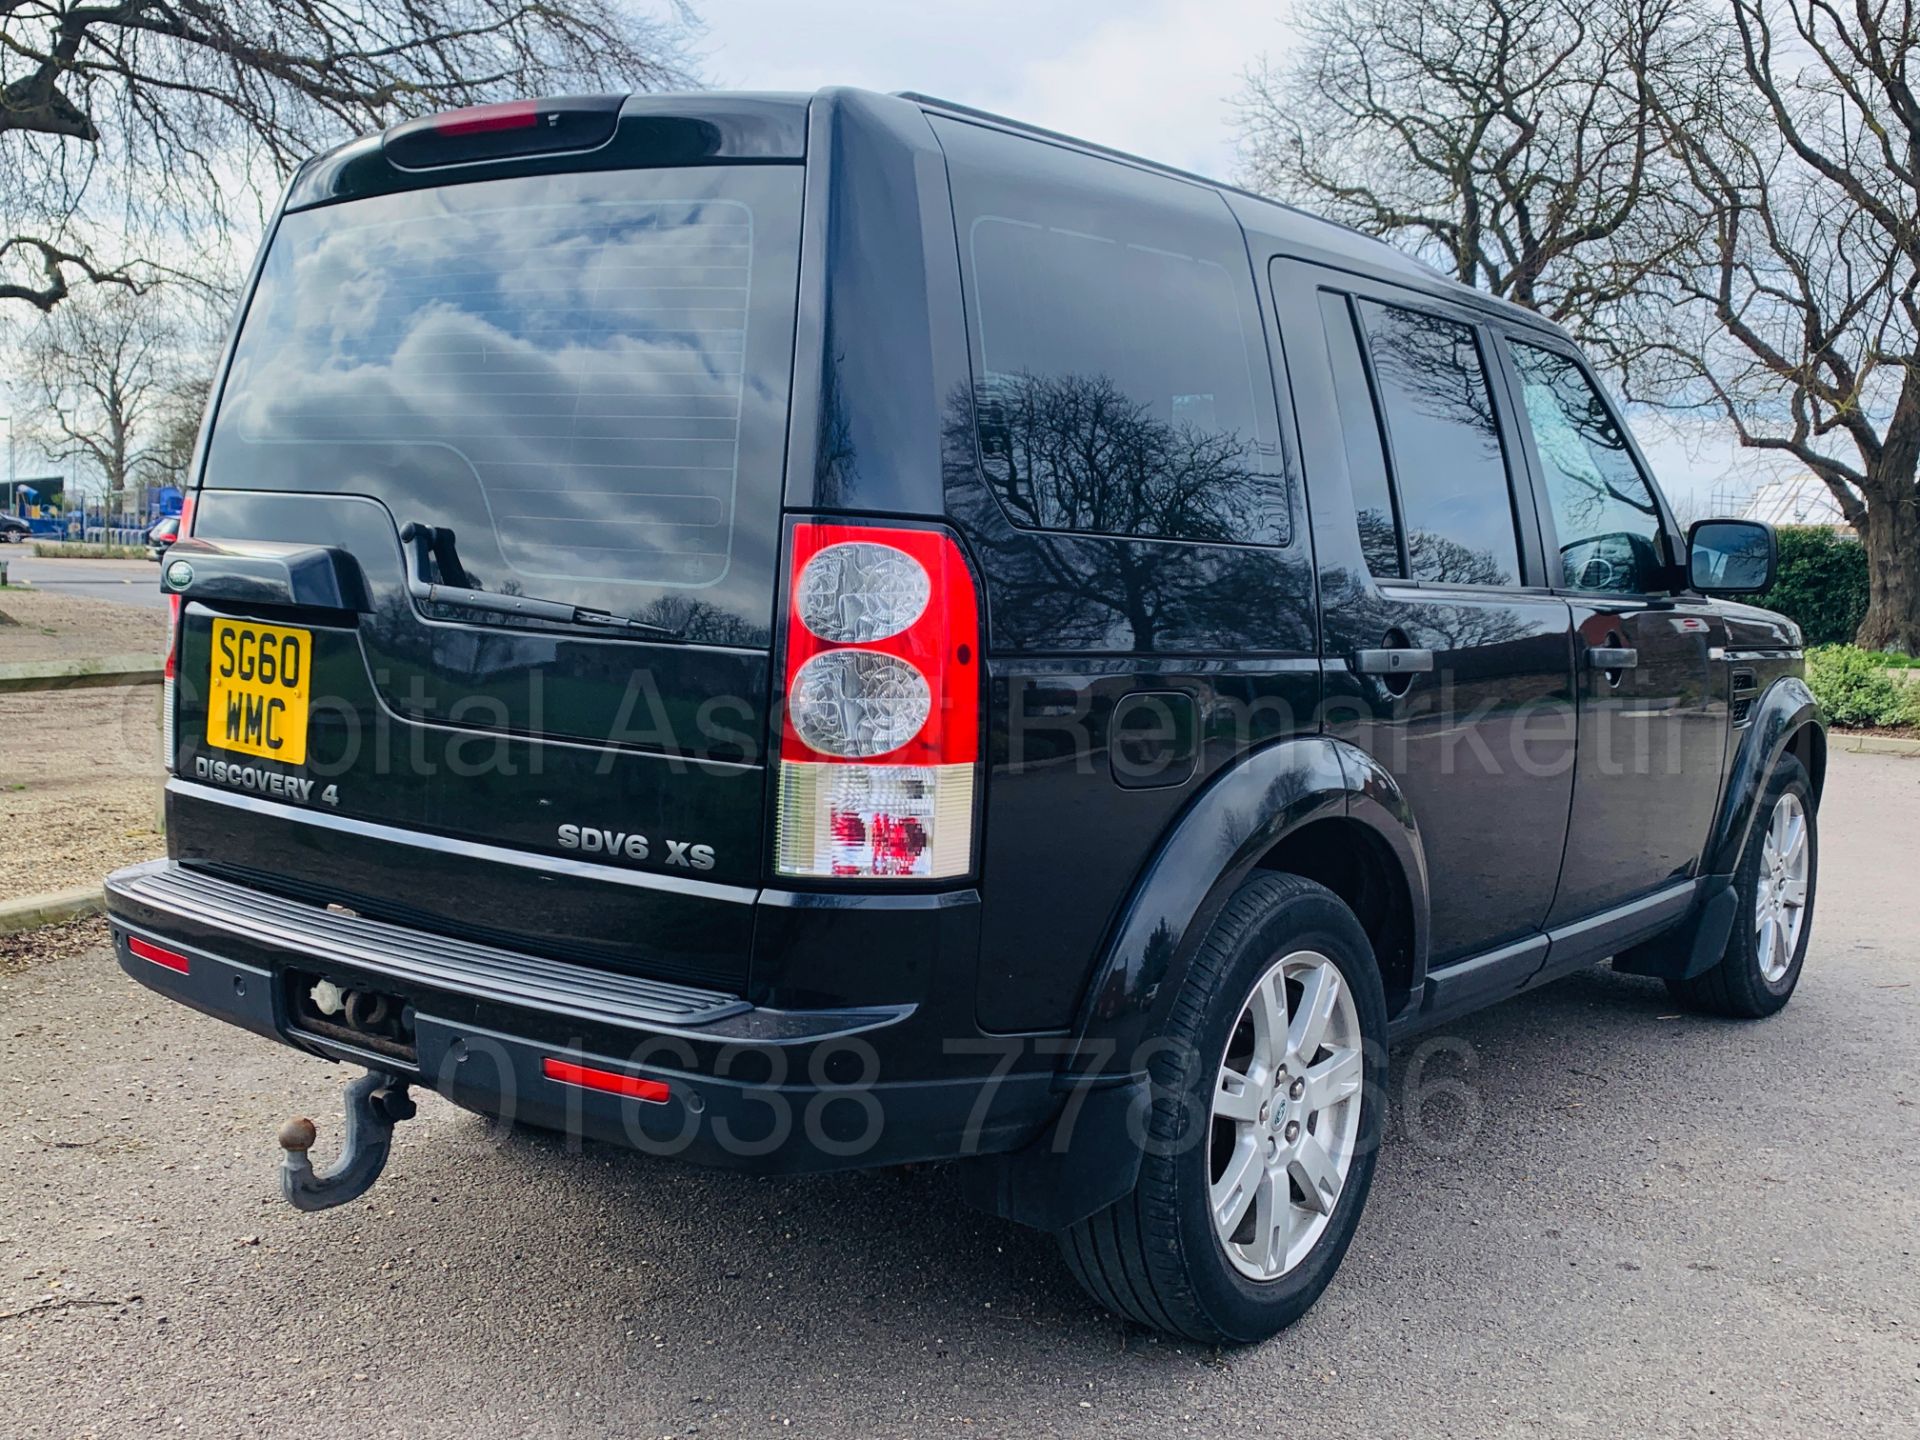 LAND ROVER DISCOVERY 4 **XS EDITION** (2011 MODEL) '3.0 TDV6 - 245 BHP - AUTO' *7 SEATER* (NO VAT) - Image 10 of 55